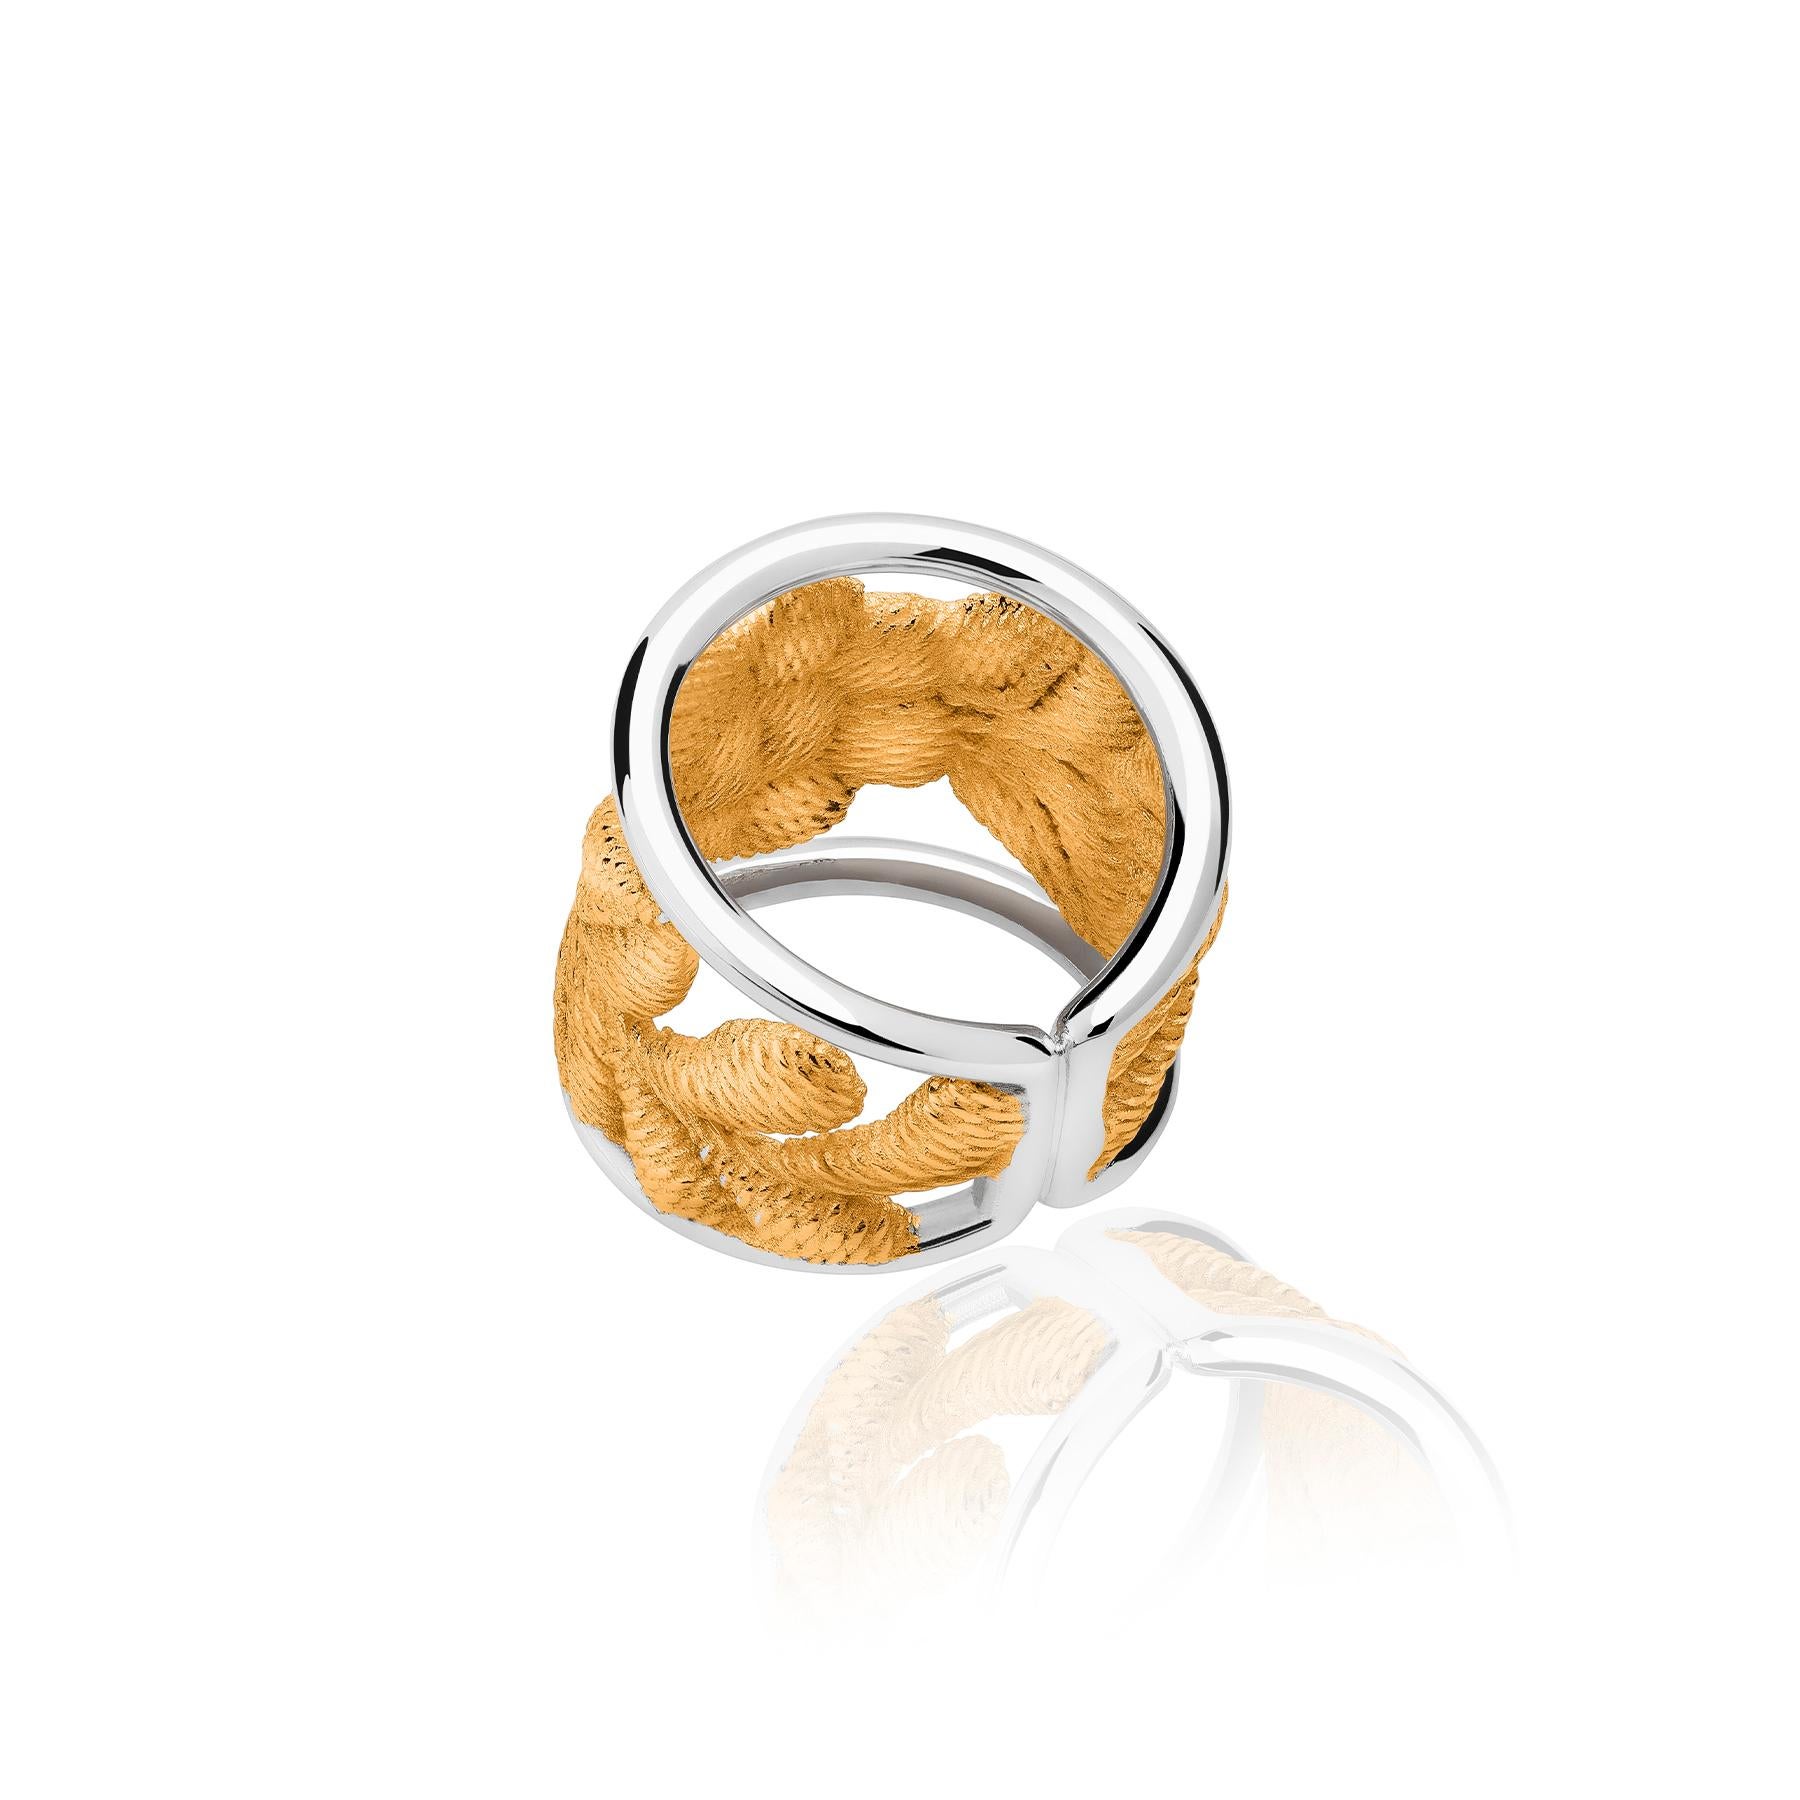 The Bordados Vermeil Ring from the Bordados Collection by TANE is made in sterling silver with 23 karat yellow gold vermeil. The piece consists of two shiny silver rings that hold the floral embroidery that have been detached from the textile to, as